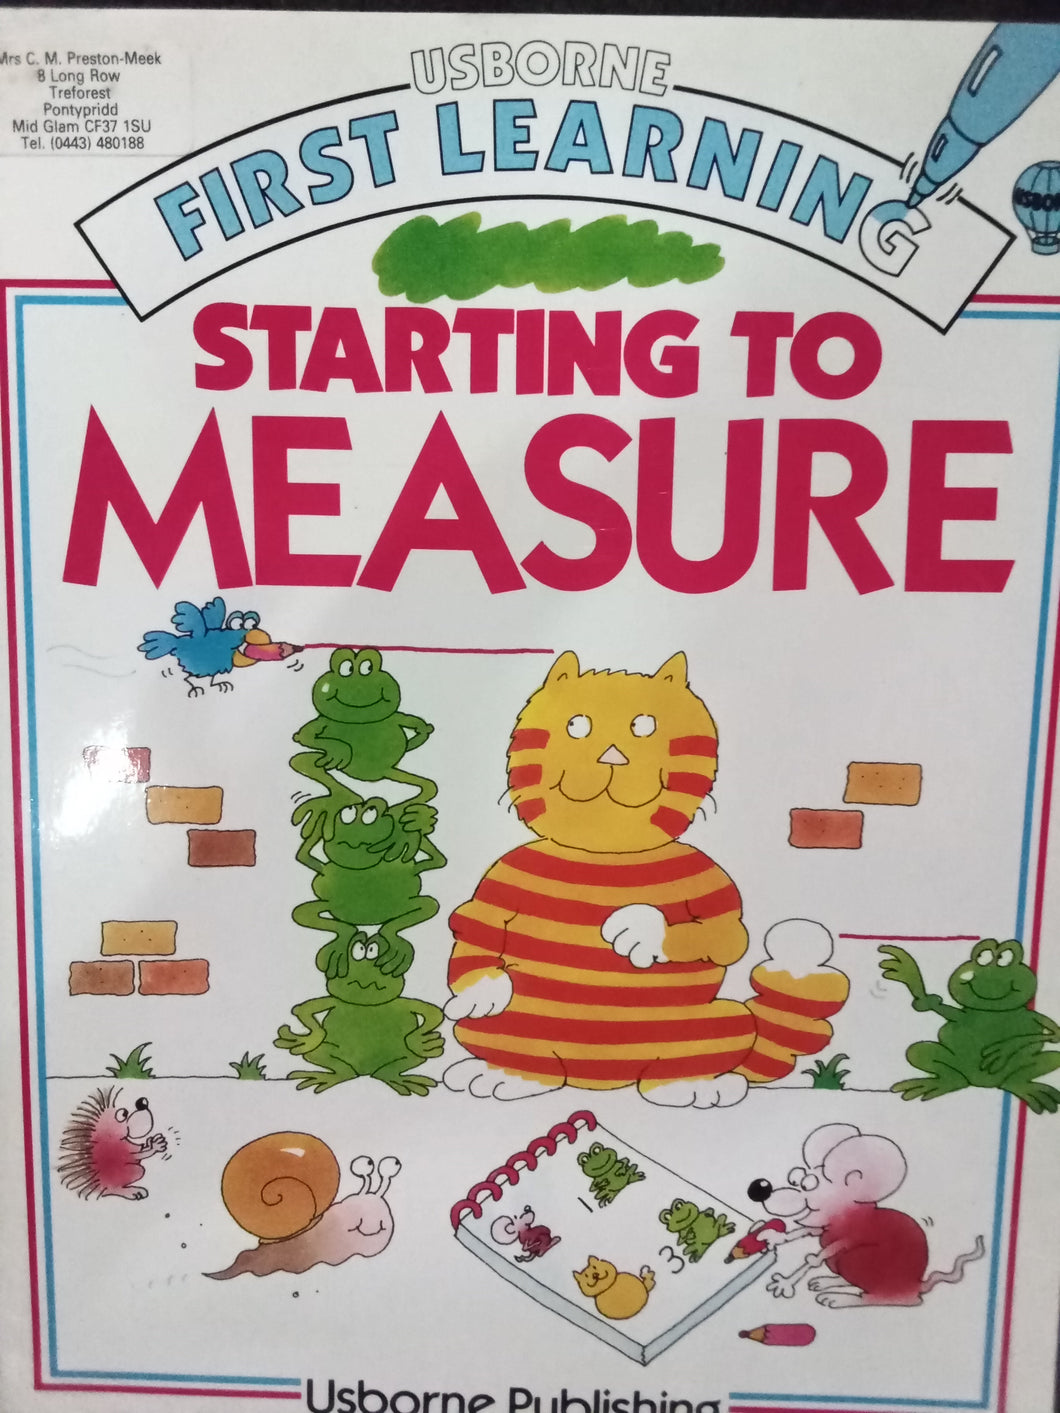 SStarting to Measure by Karen Bryant-Mole